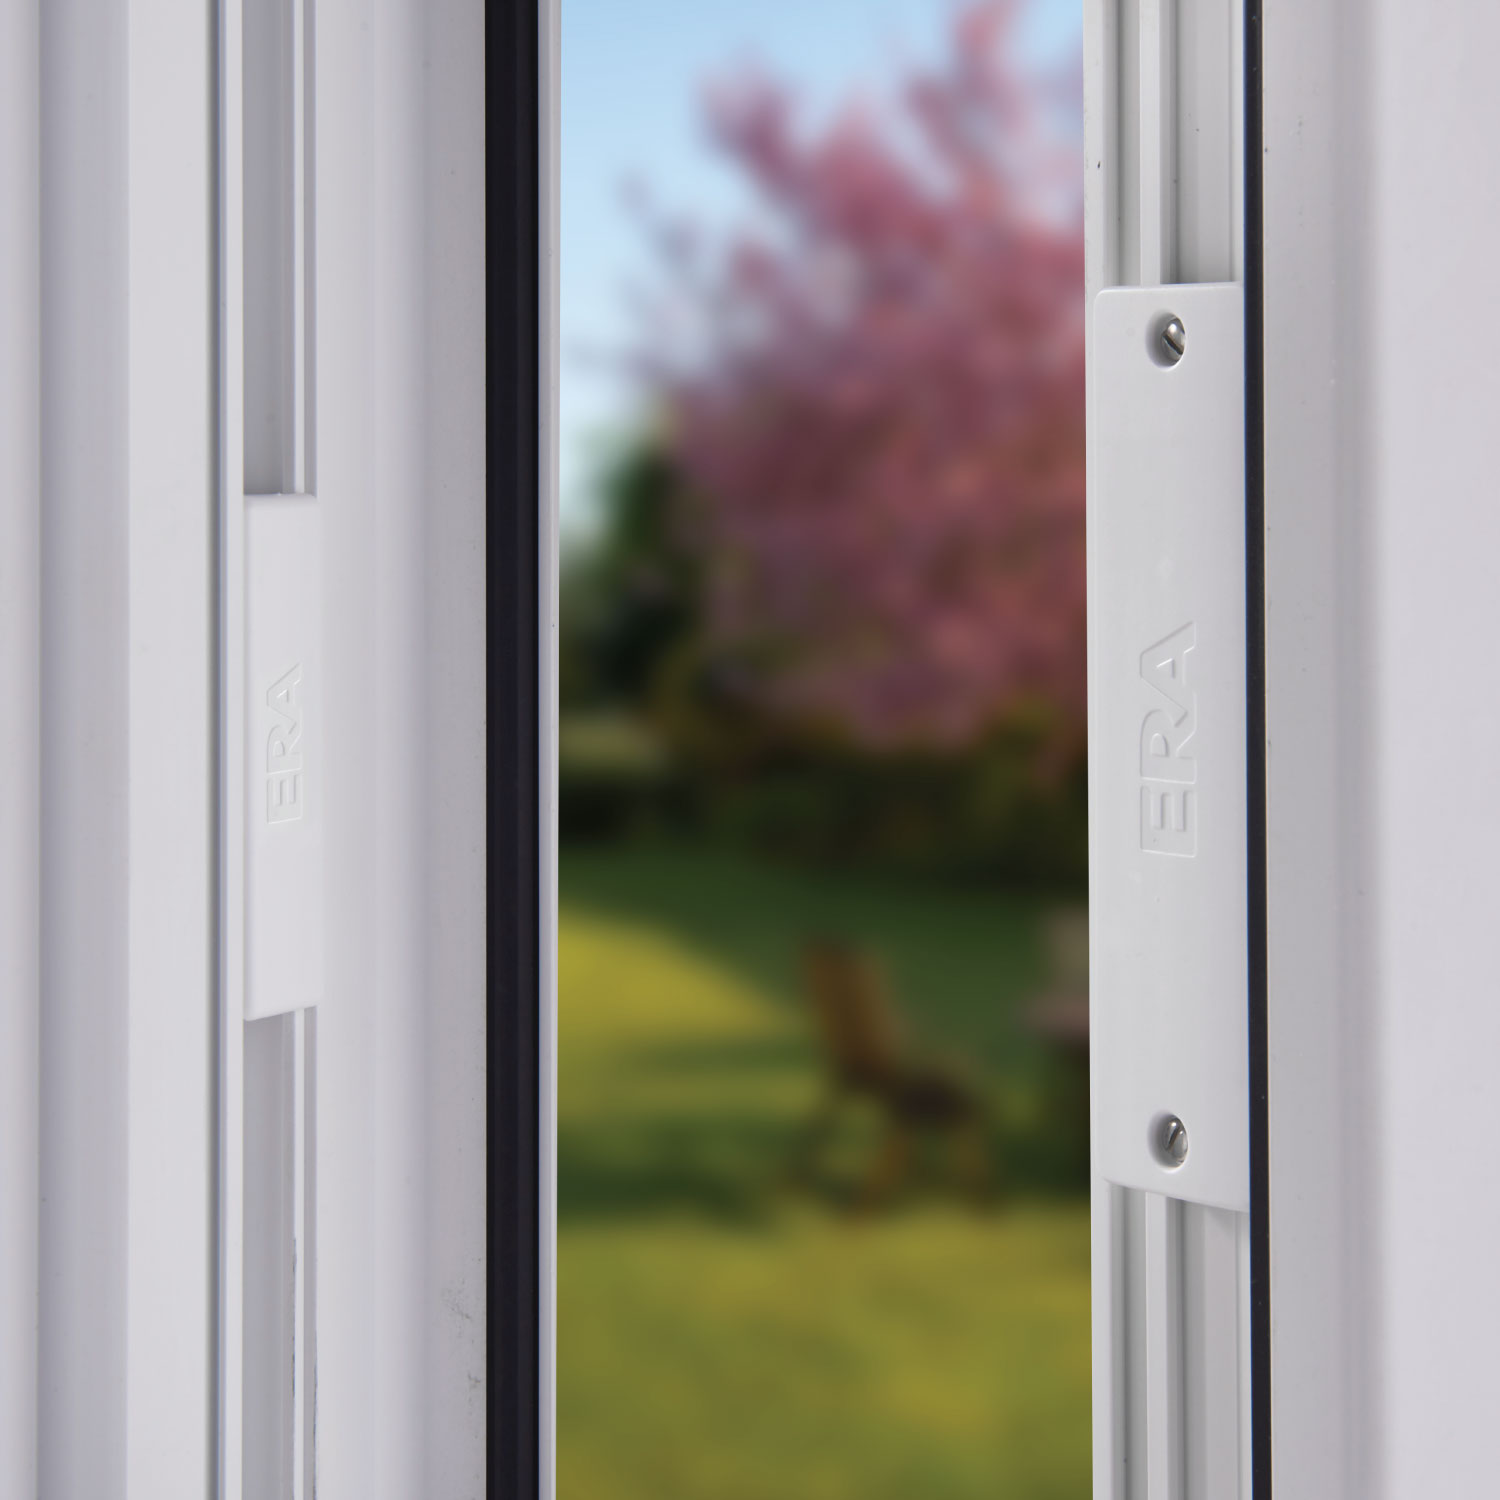 Home security specialist, ERA, has partnered with Yorkshire’s leading provider of windows, doors, and conservatories, Coral Windows and Conservatories, to create a unique smart offering.